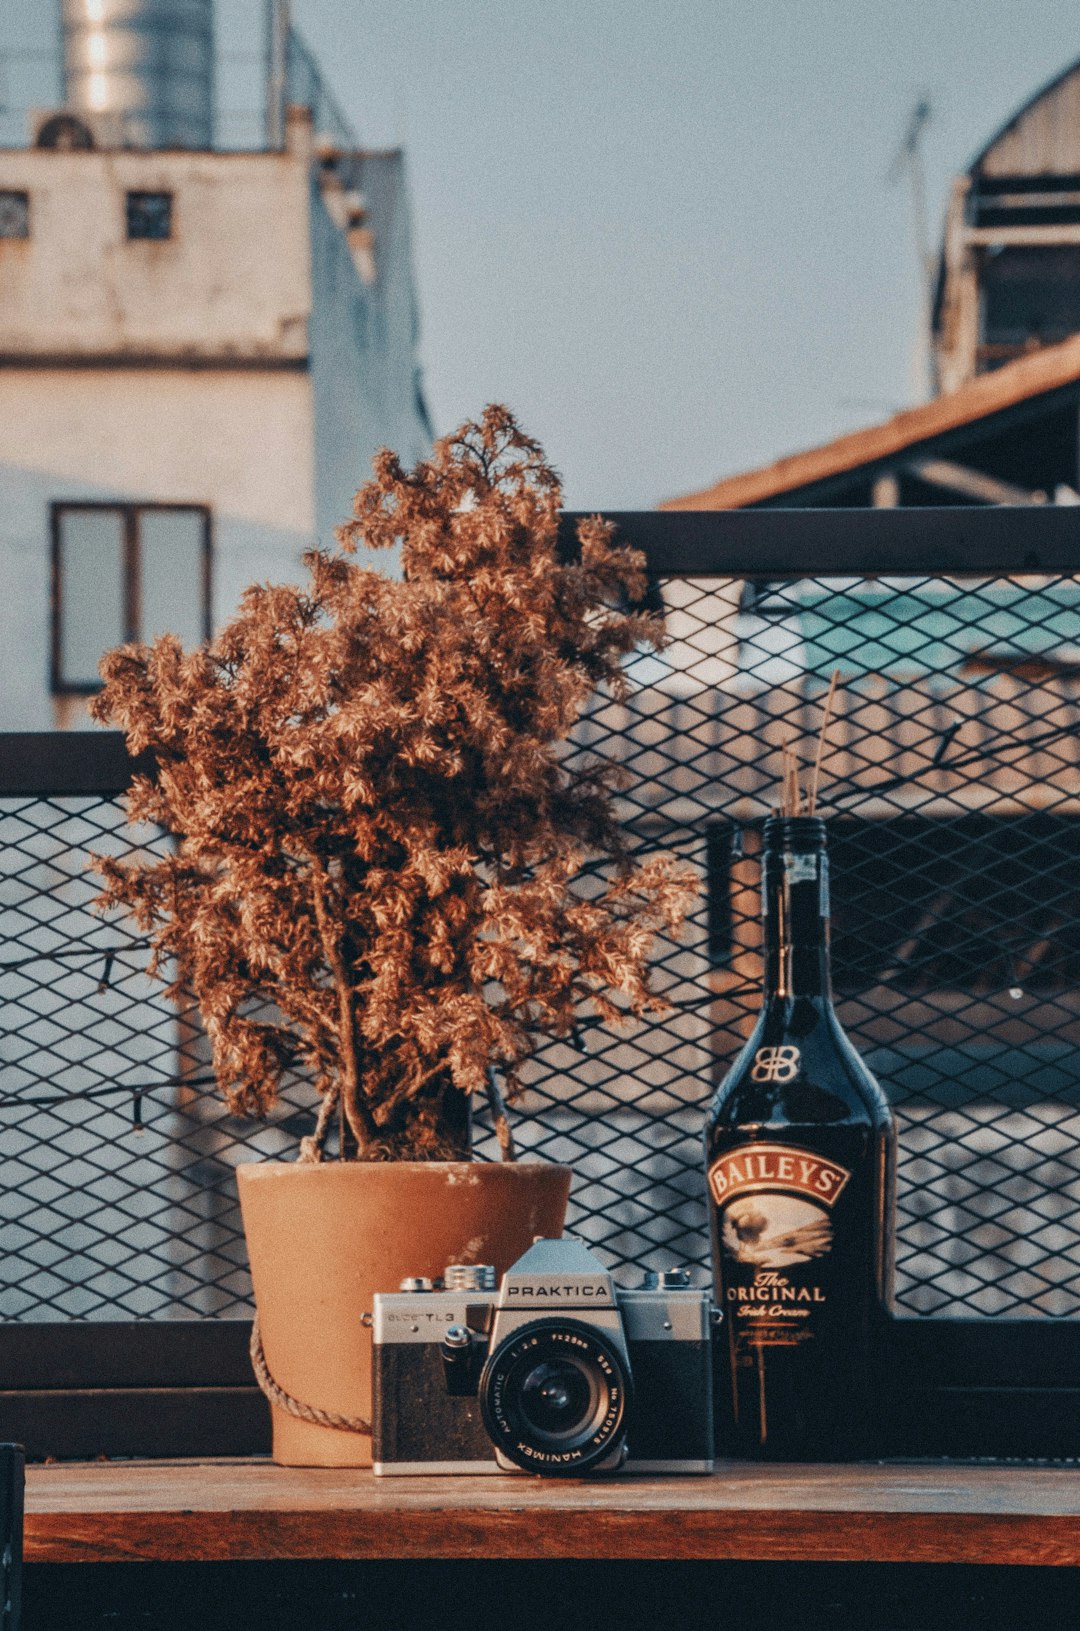 wine bottle beside plant and camera